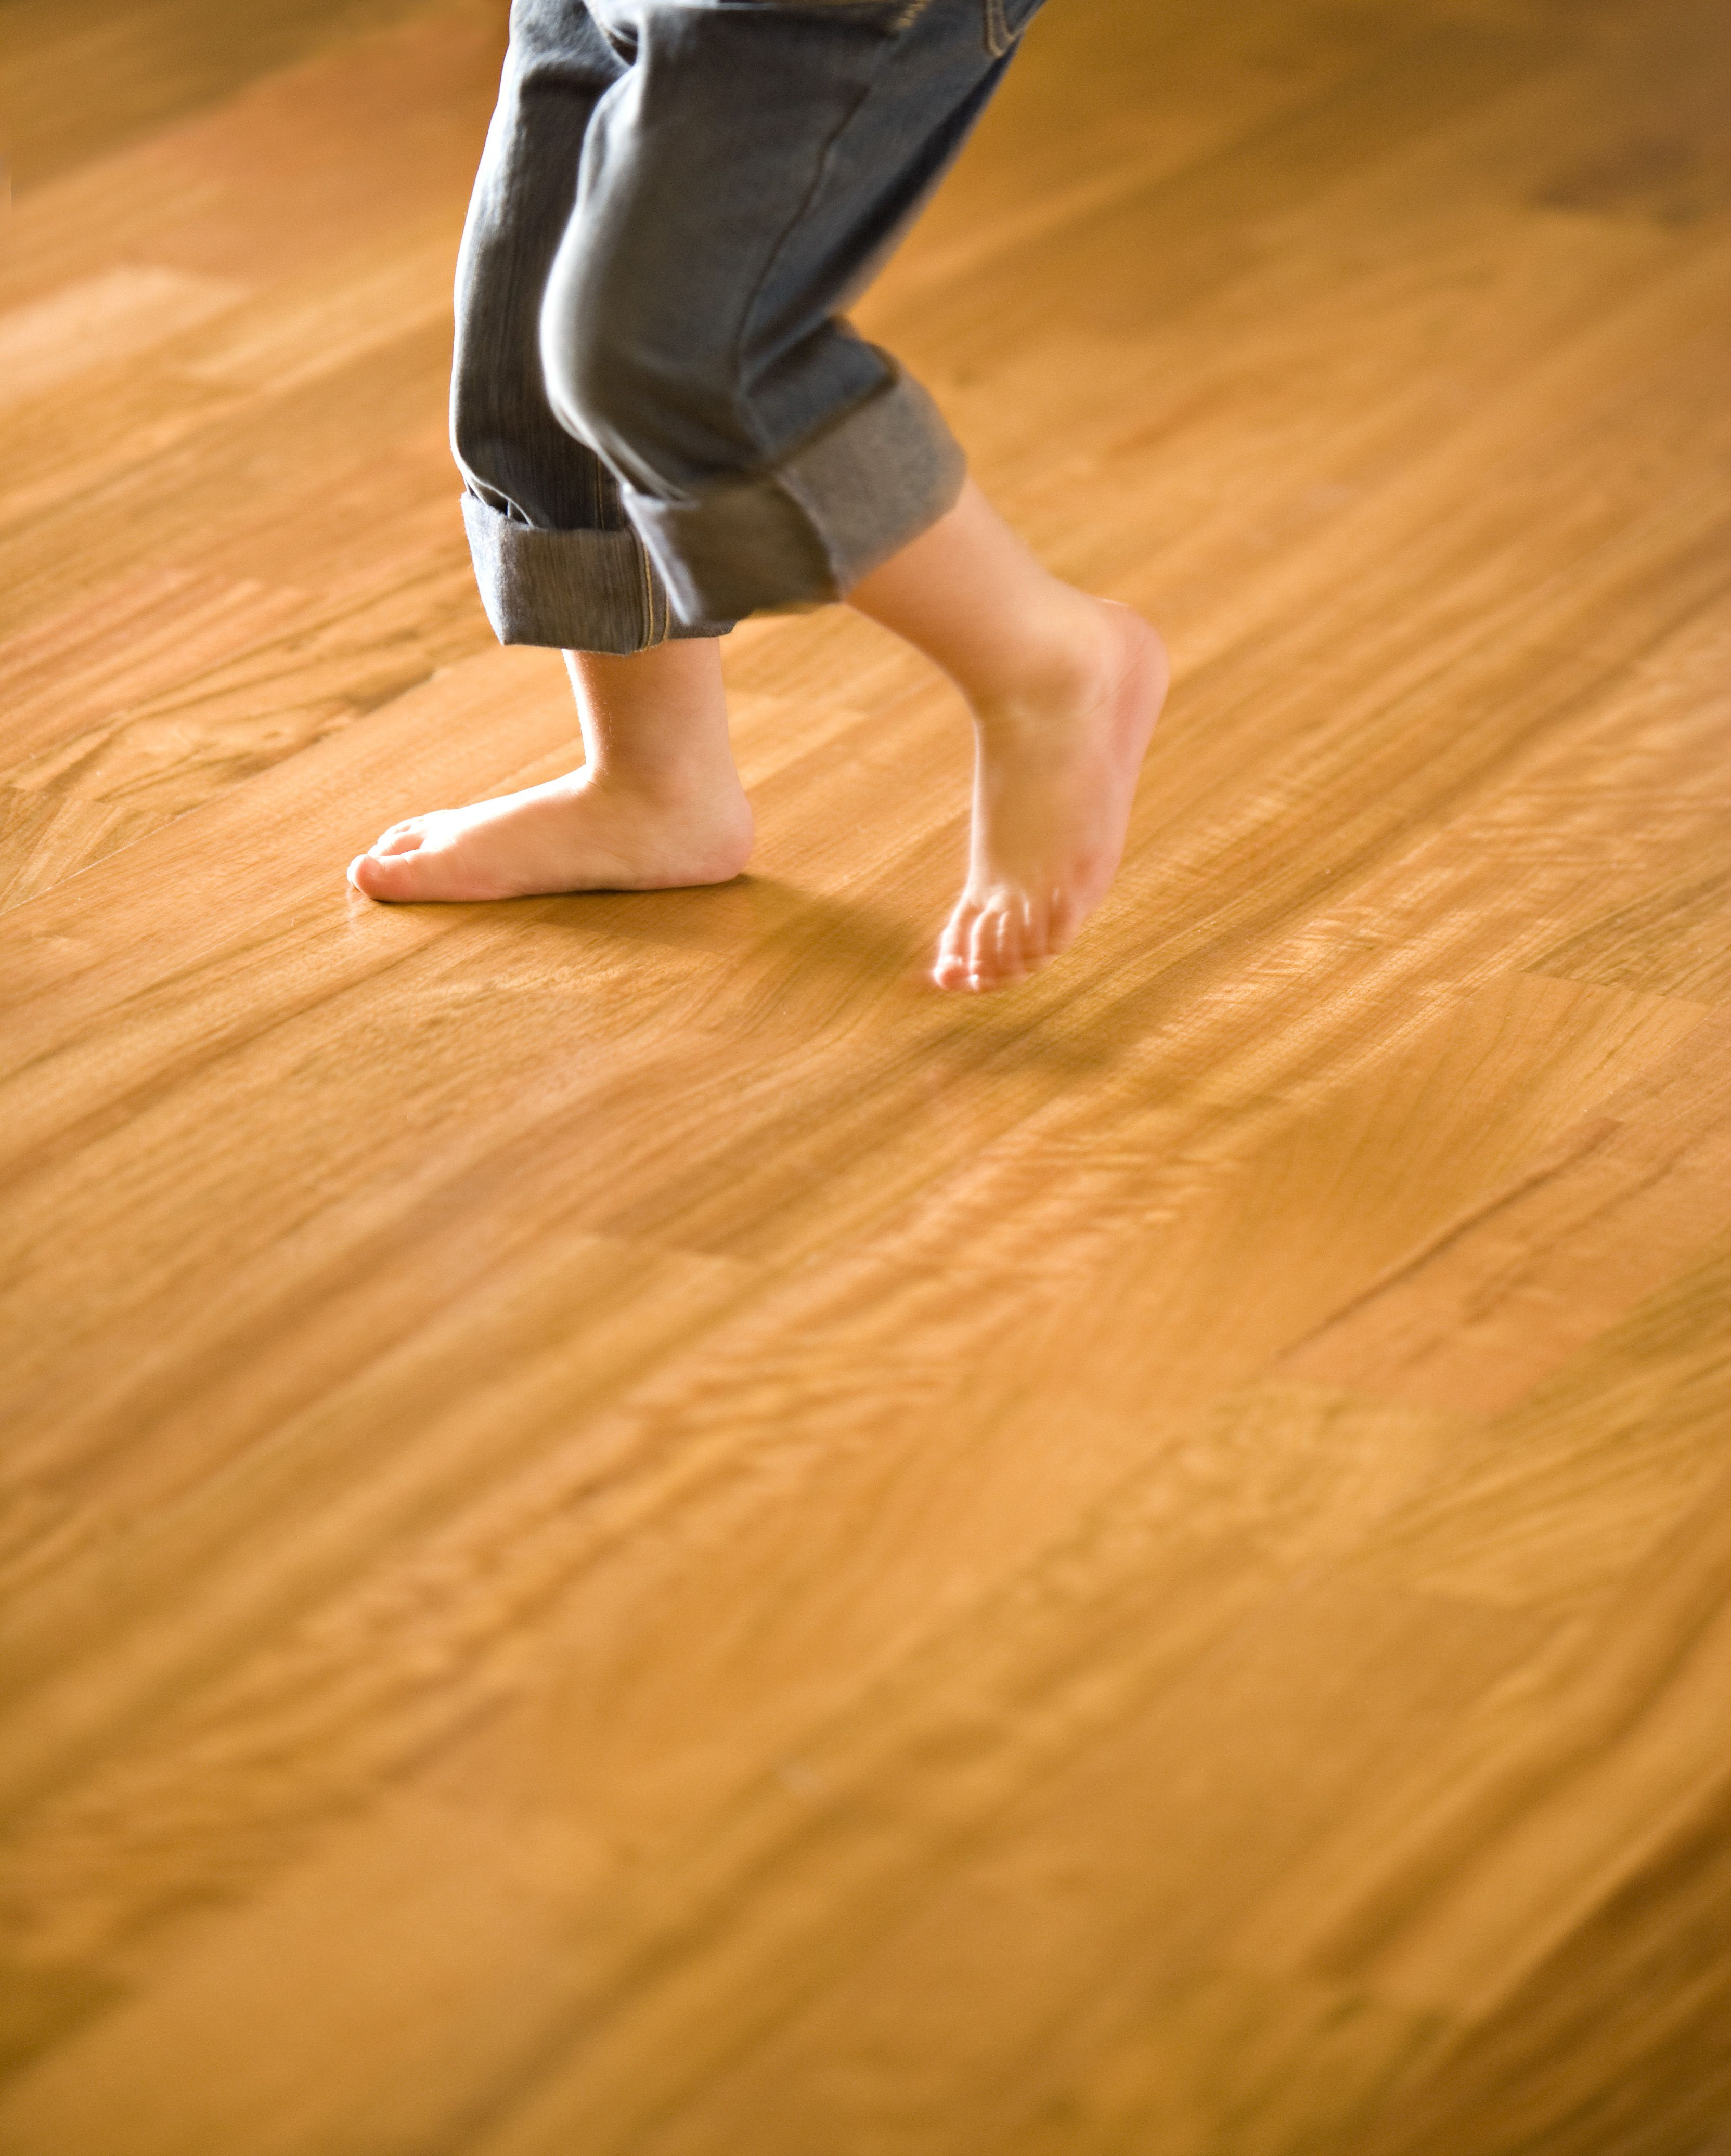 19 Recommended Bona Hardwood Floor Cleaner 128 Oz 2024 free download bona hardwood floor cleaner 128 oz of make sure your hardwood floors are clean for the tiny bare feet in regarding make sure your hardwood floors are clean for the tiny bare feet in your hom